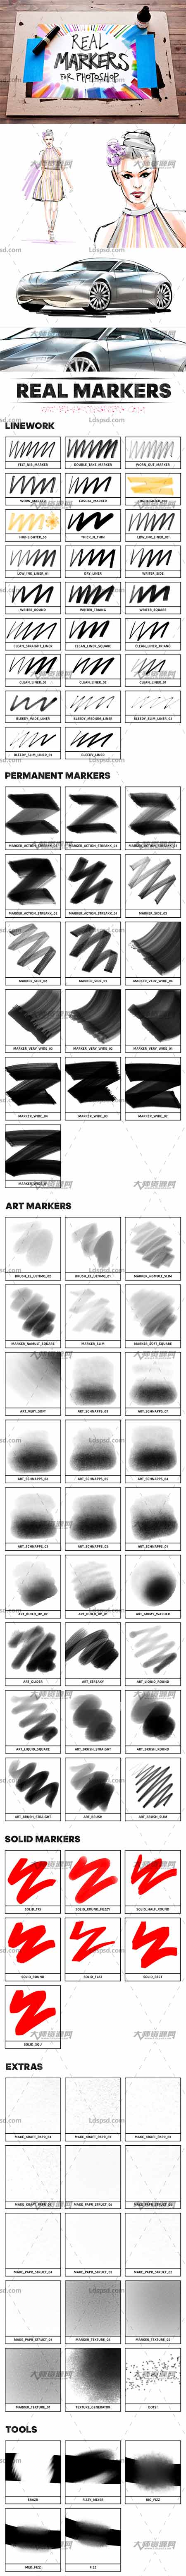 REAL MARKERS FOR PHOTOSHOP,PS工具预设－101支专业绘图笔刷